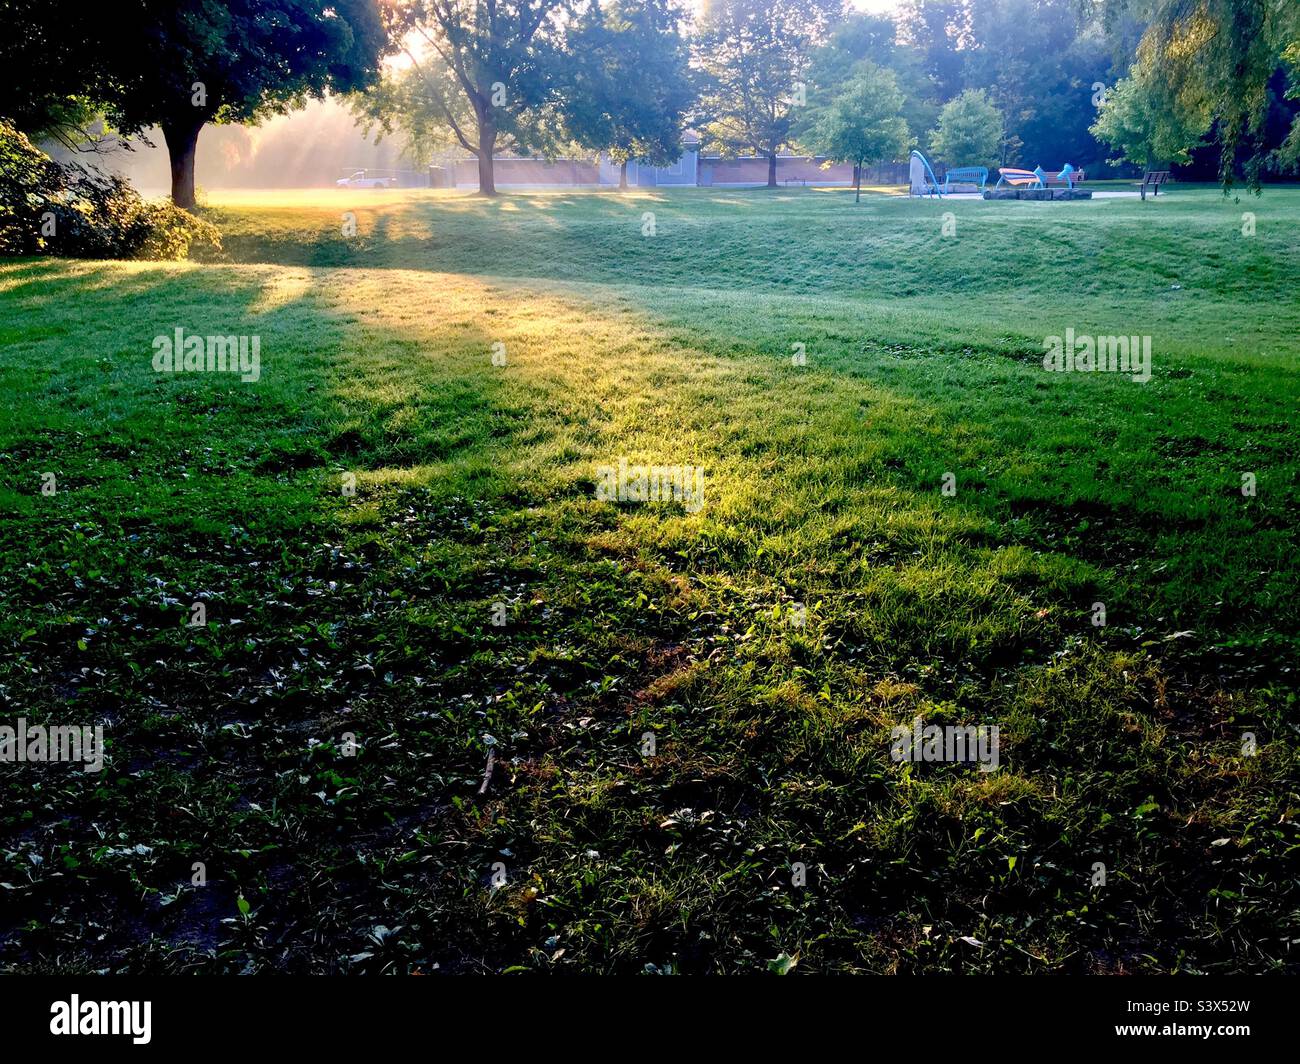 Golden hour. Here comes the morning. A large urban park, Ontario, Canada. Stock Photo